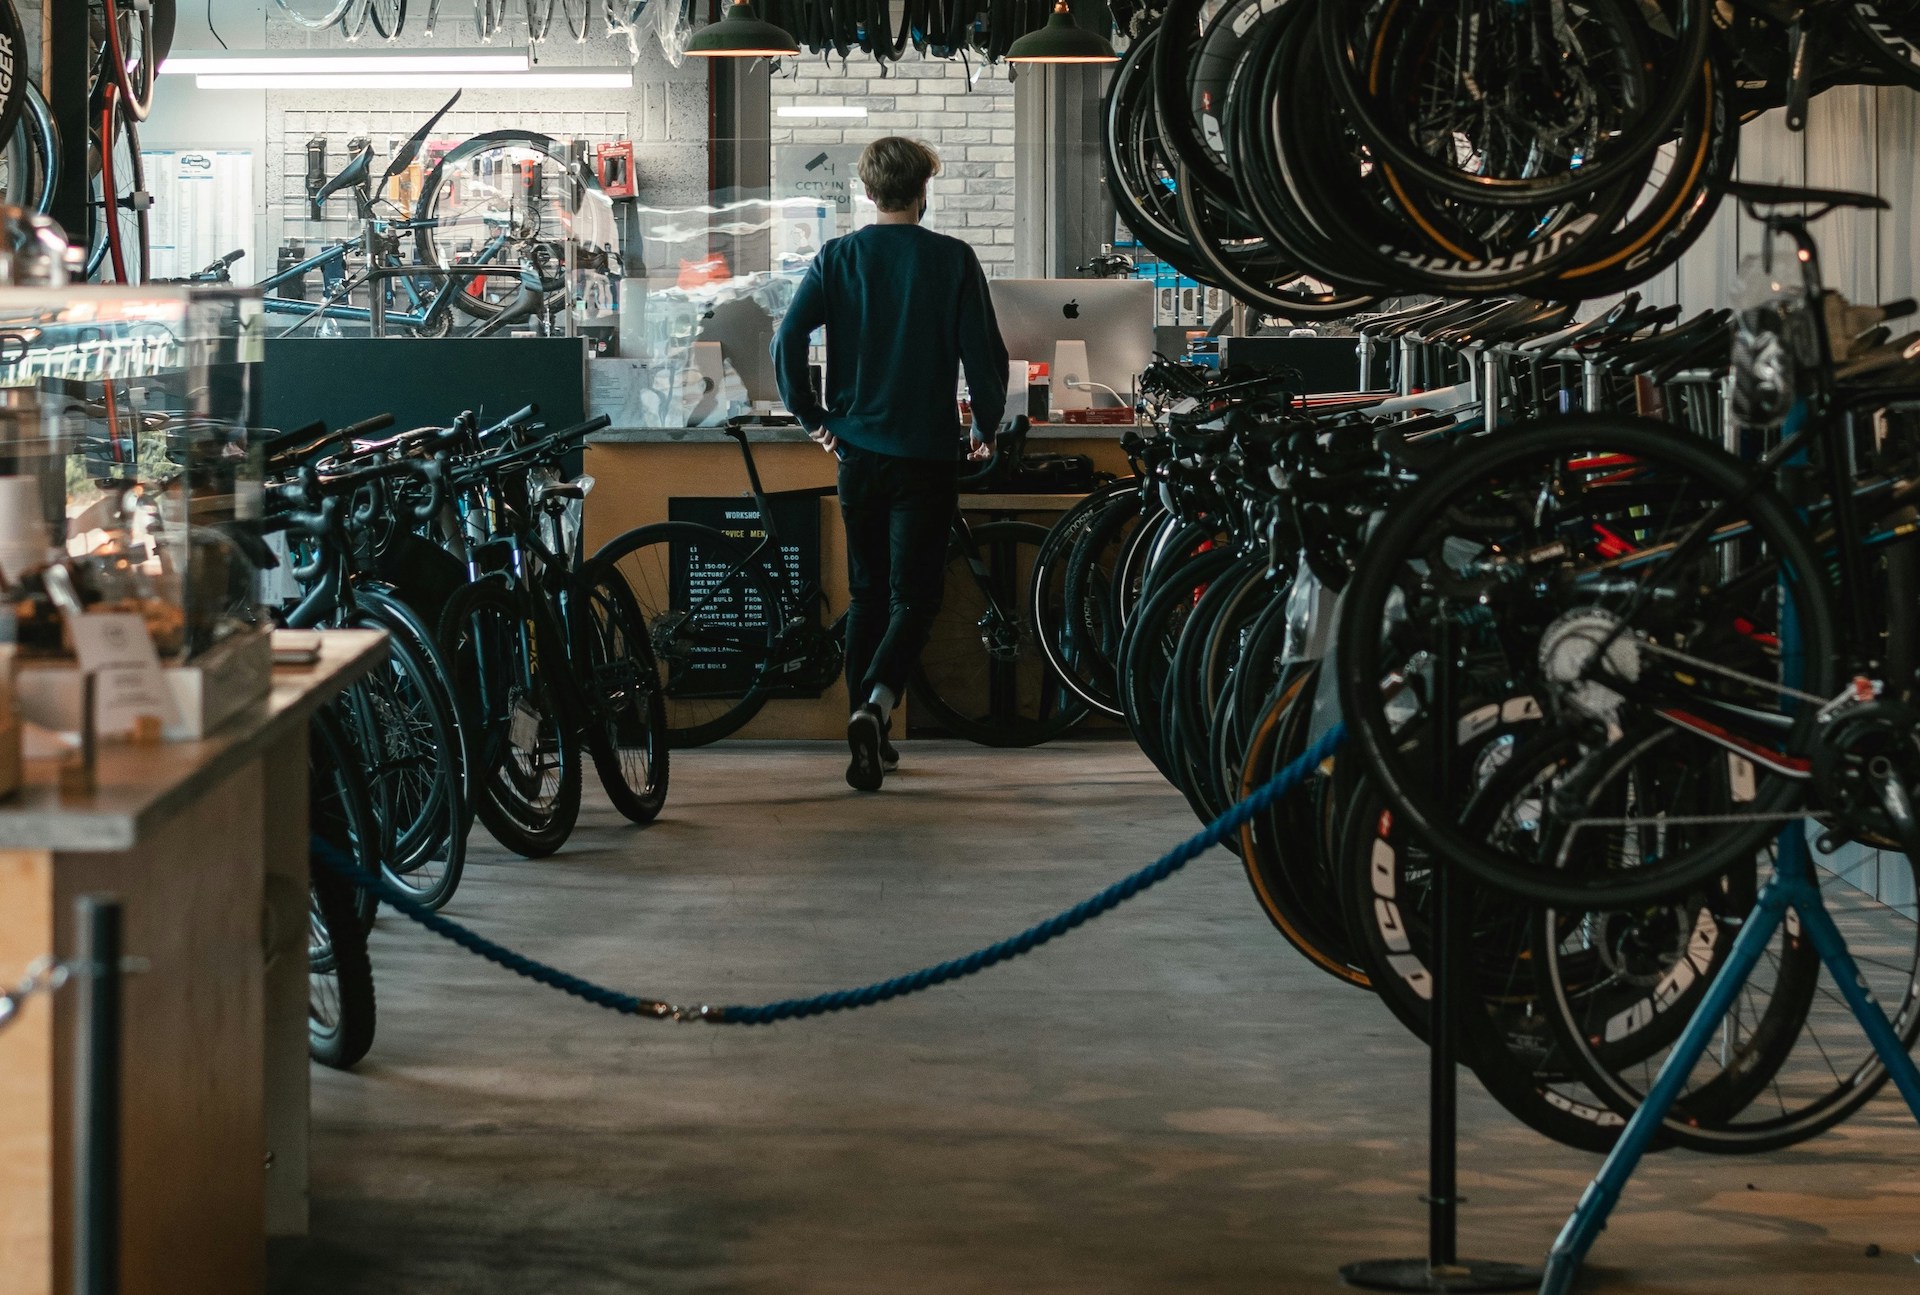 A man walks away from the camera down an aisle in a bike shop, lined by two rows packed with bikes. In front of him is the workshop area.